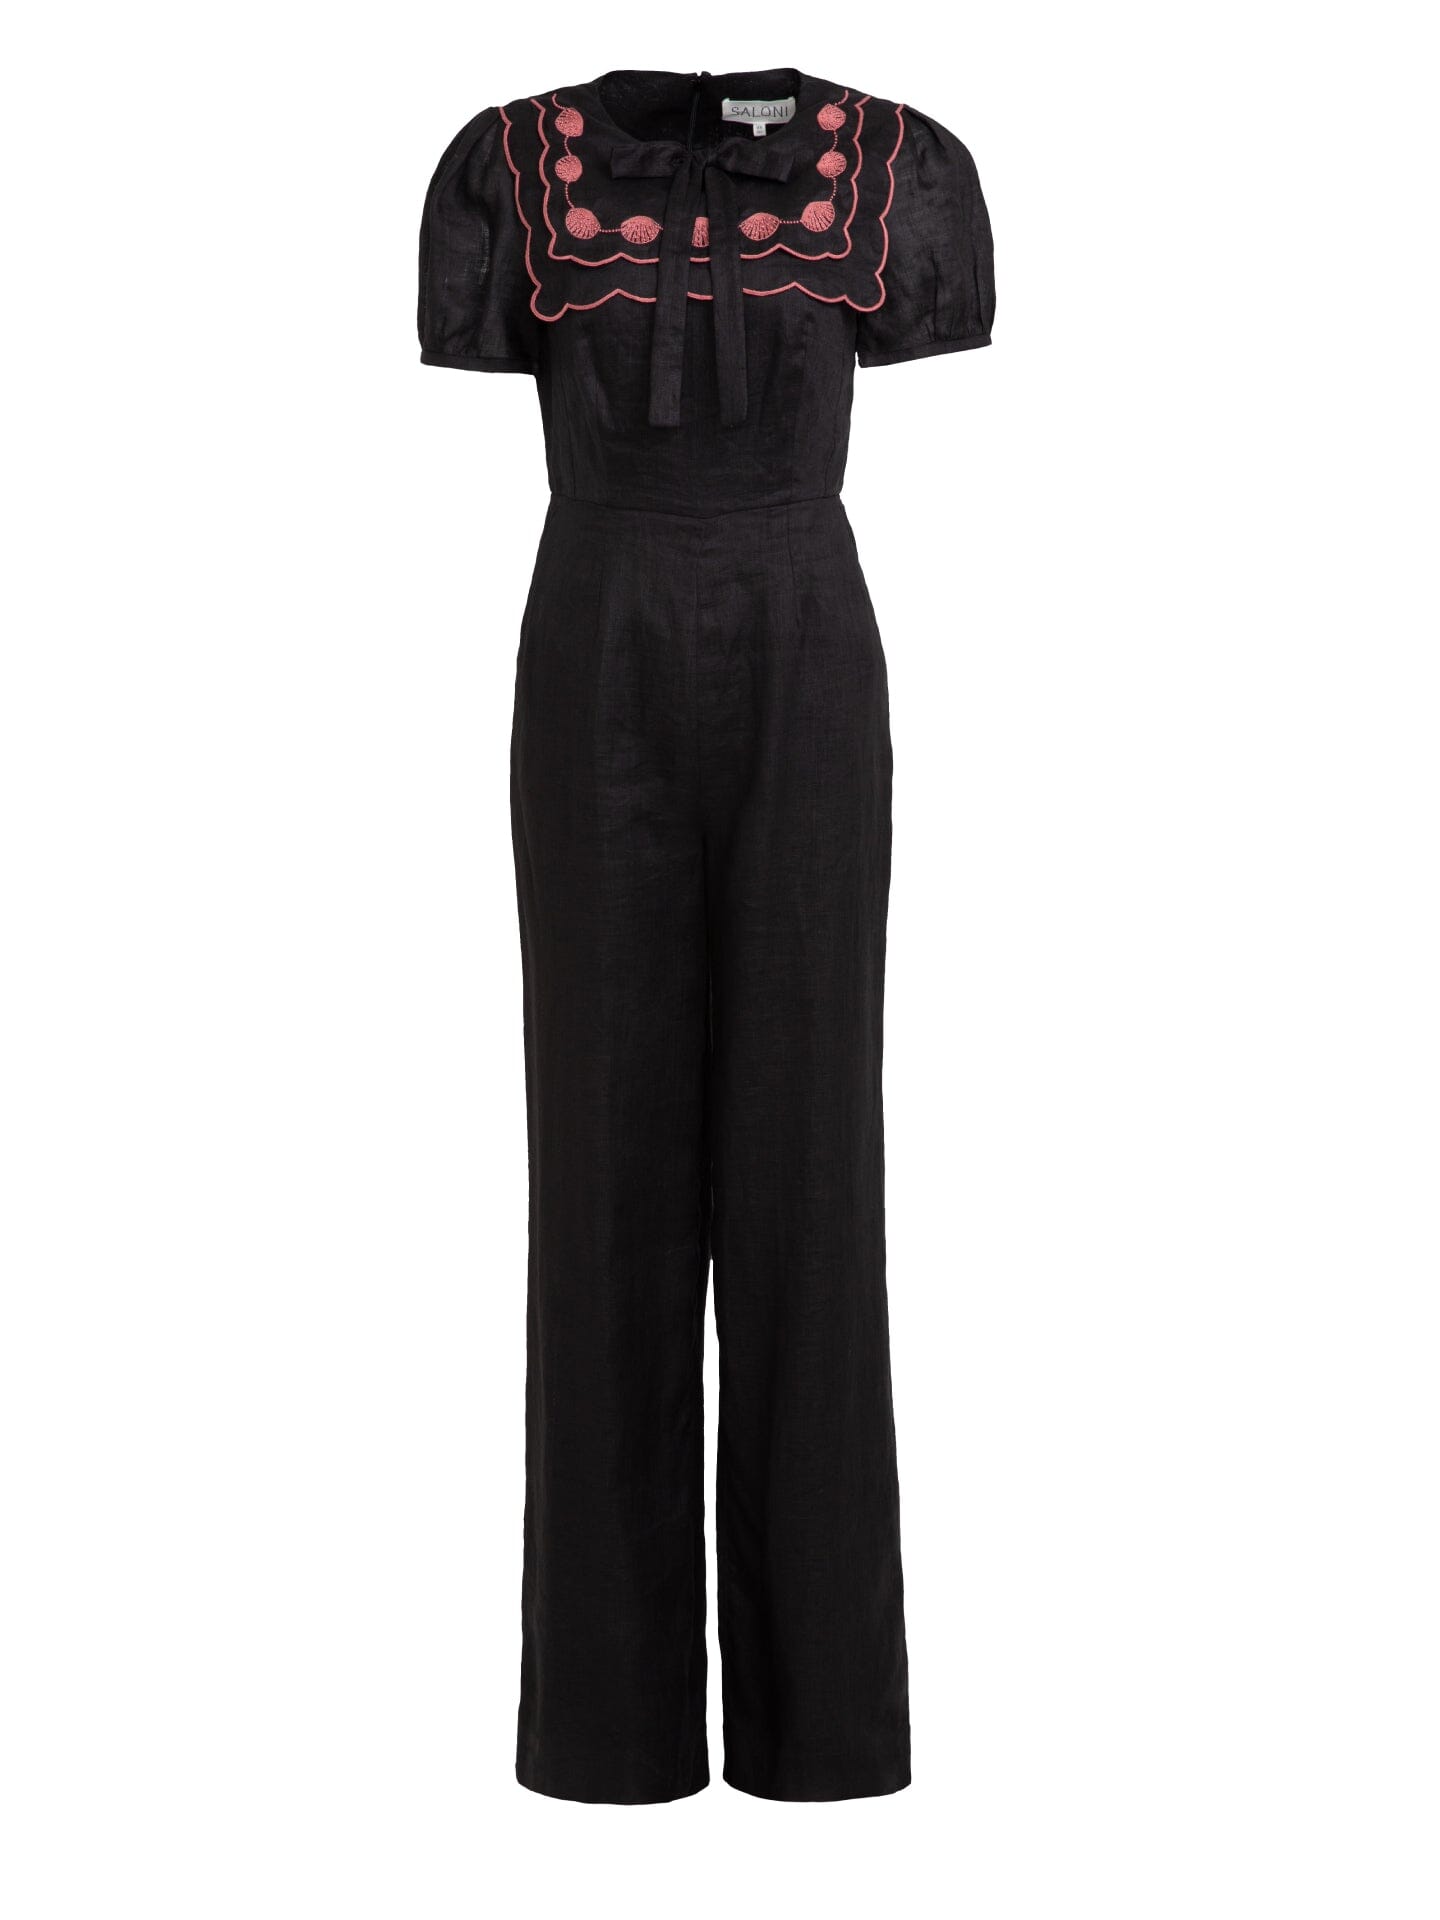 Marlowe Jumpsuit in Black with Shell Embroidery